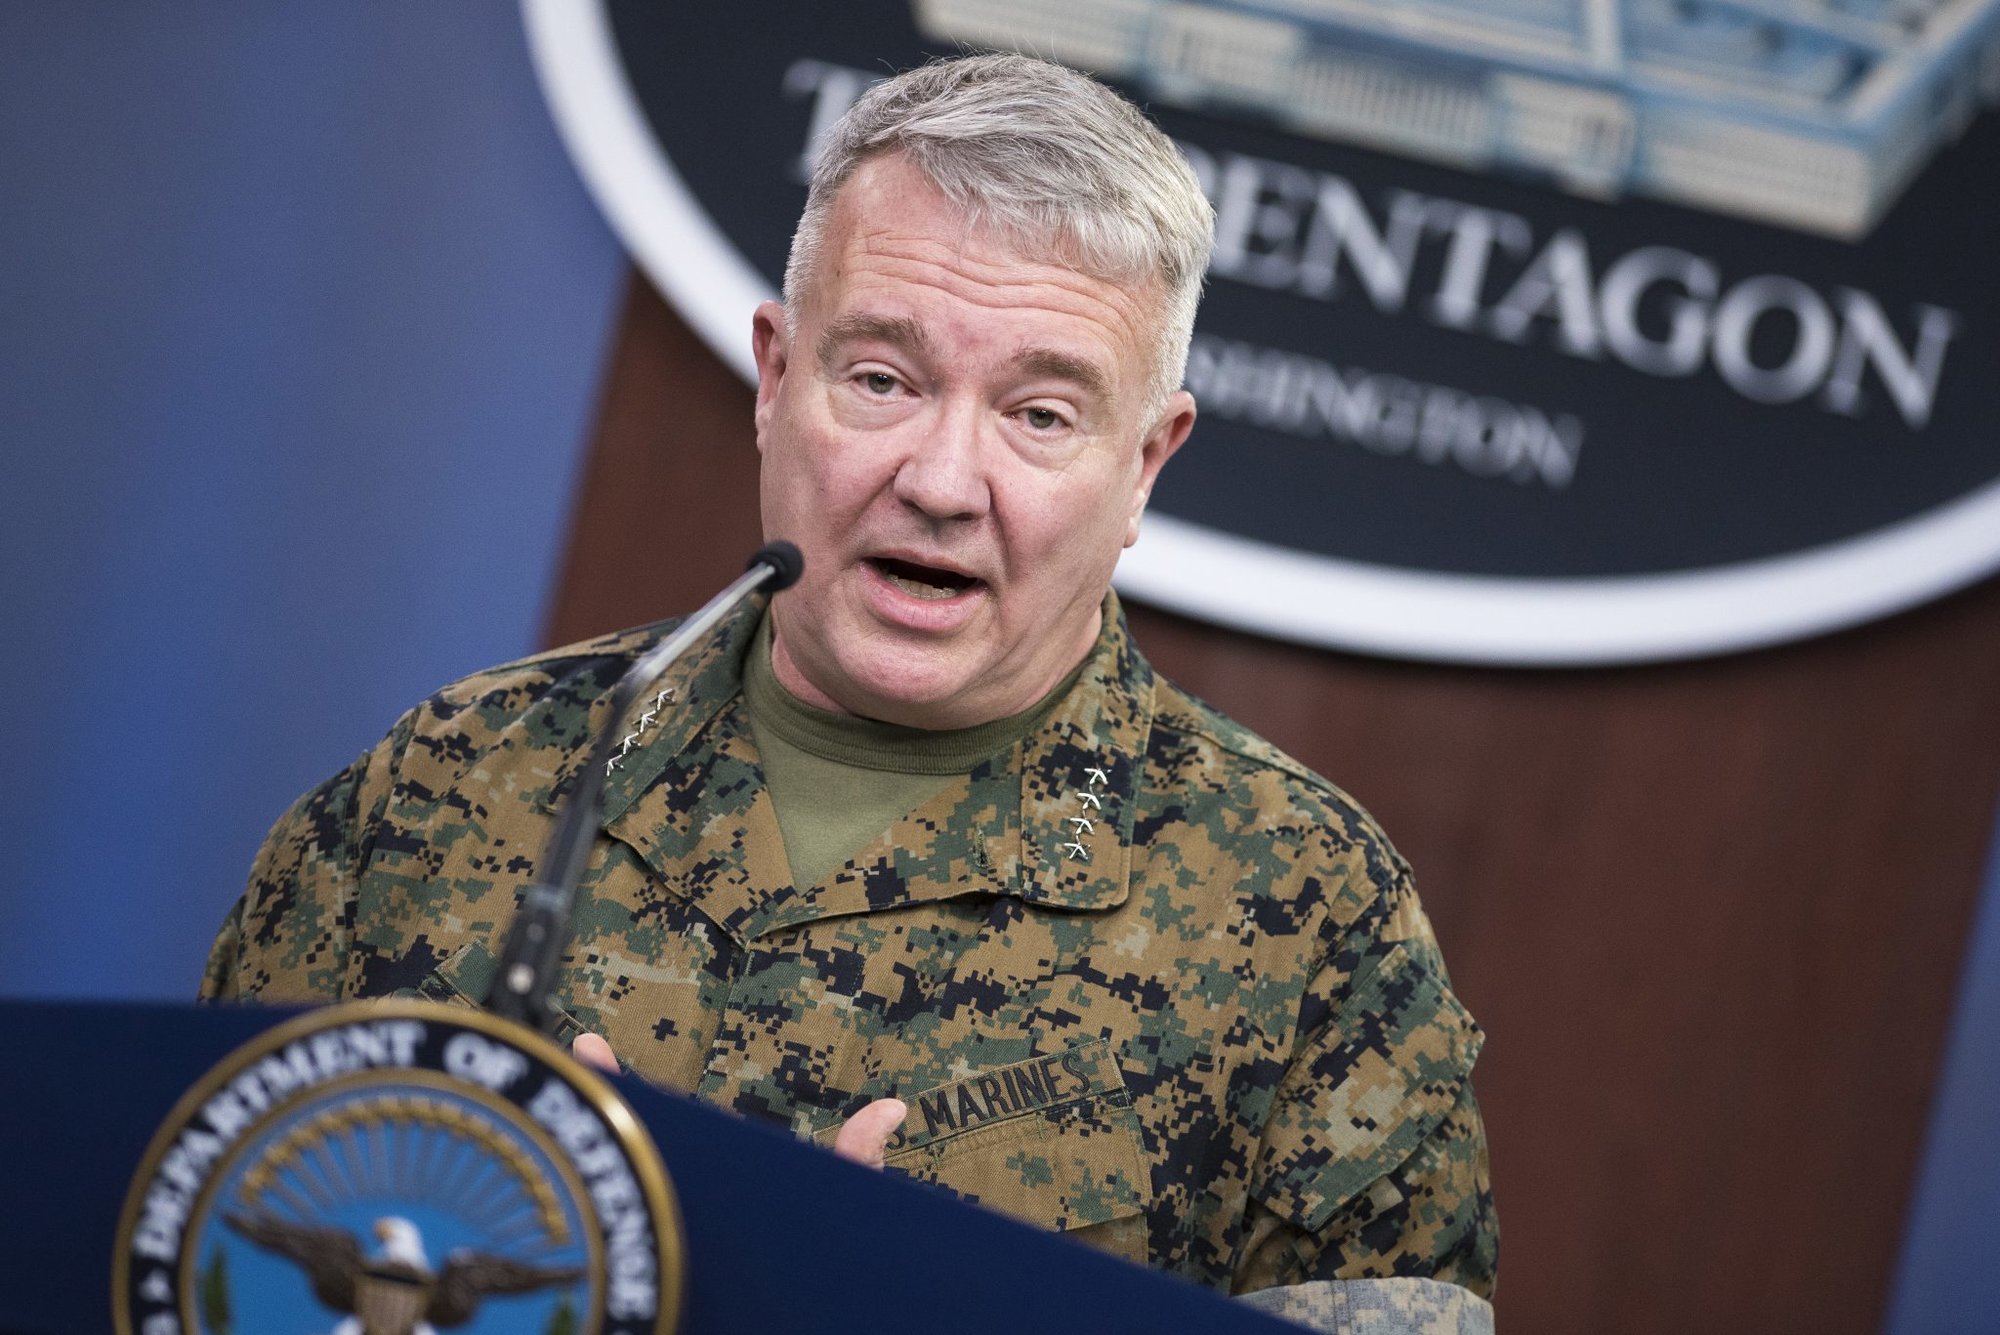 The commander of U.S. Central Command, Marine Corps Gen. Kenneth F. McKenzie Jr., briefs reporters on the status of operations in the CENTCOM area of responsibility, at the Pentagon, Washington, D.C., March 13, 2020. (DoD photo by Lisa Ferdinando)